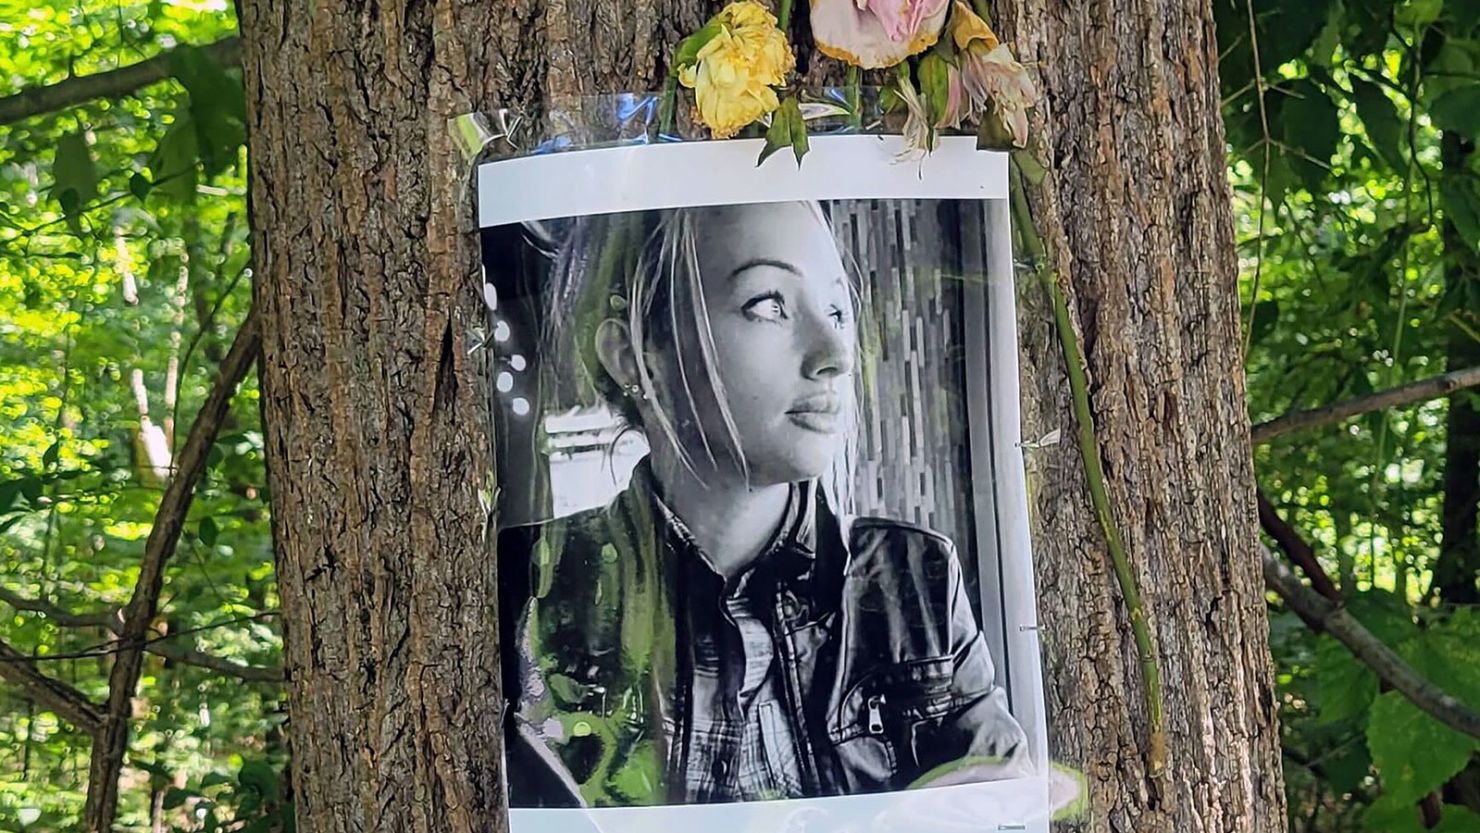 A memorial for Rachel Morin is displayed on a tree on the Ma & Pa Trail in Bel Air, Maryland.